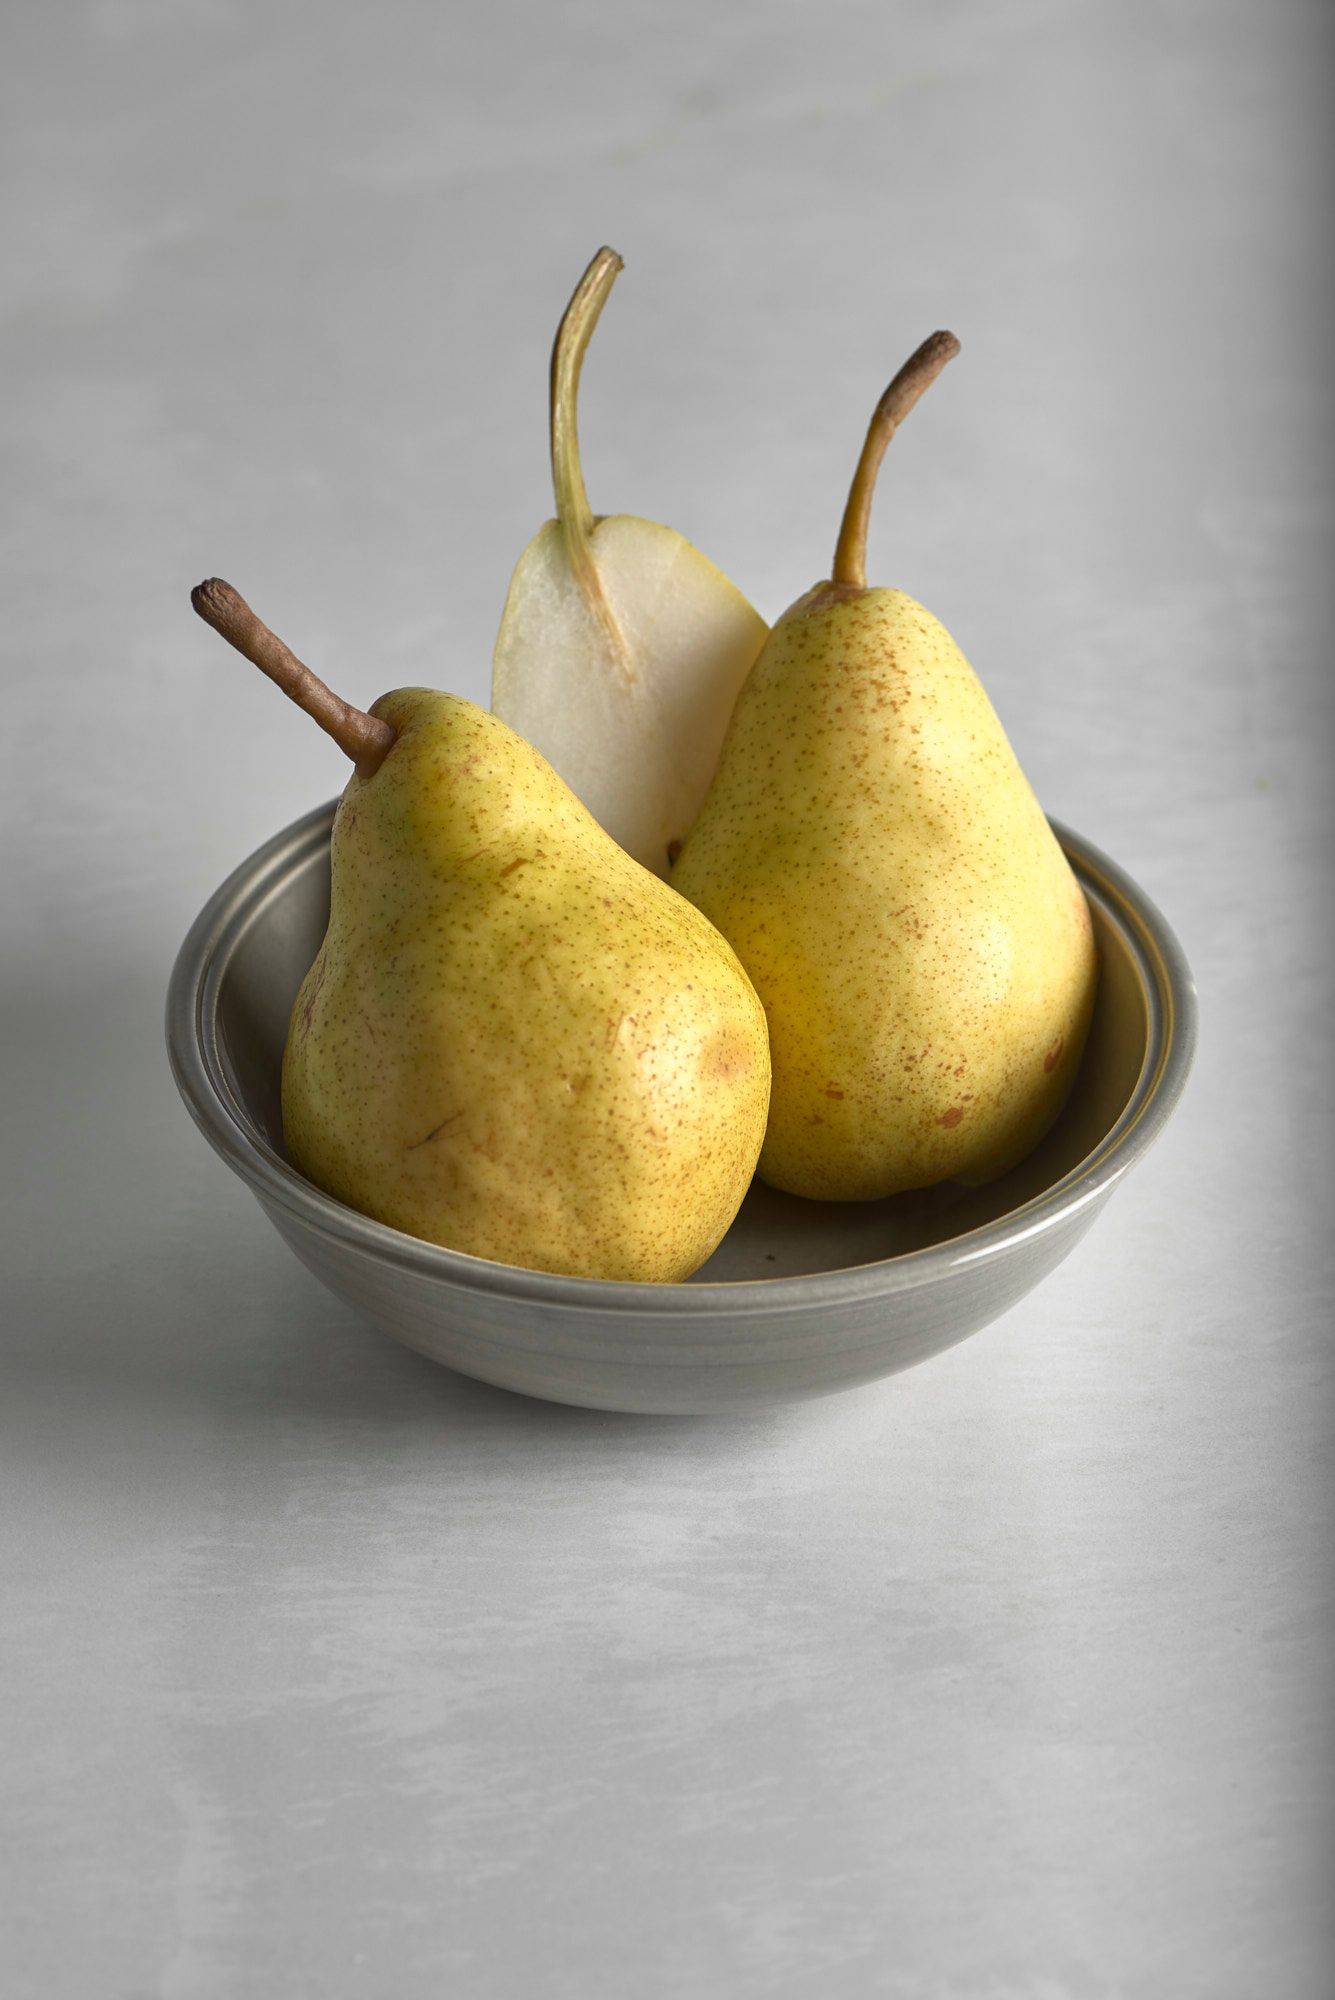 three pears in a gray ceramic bowl on a white stone table